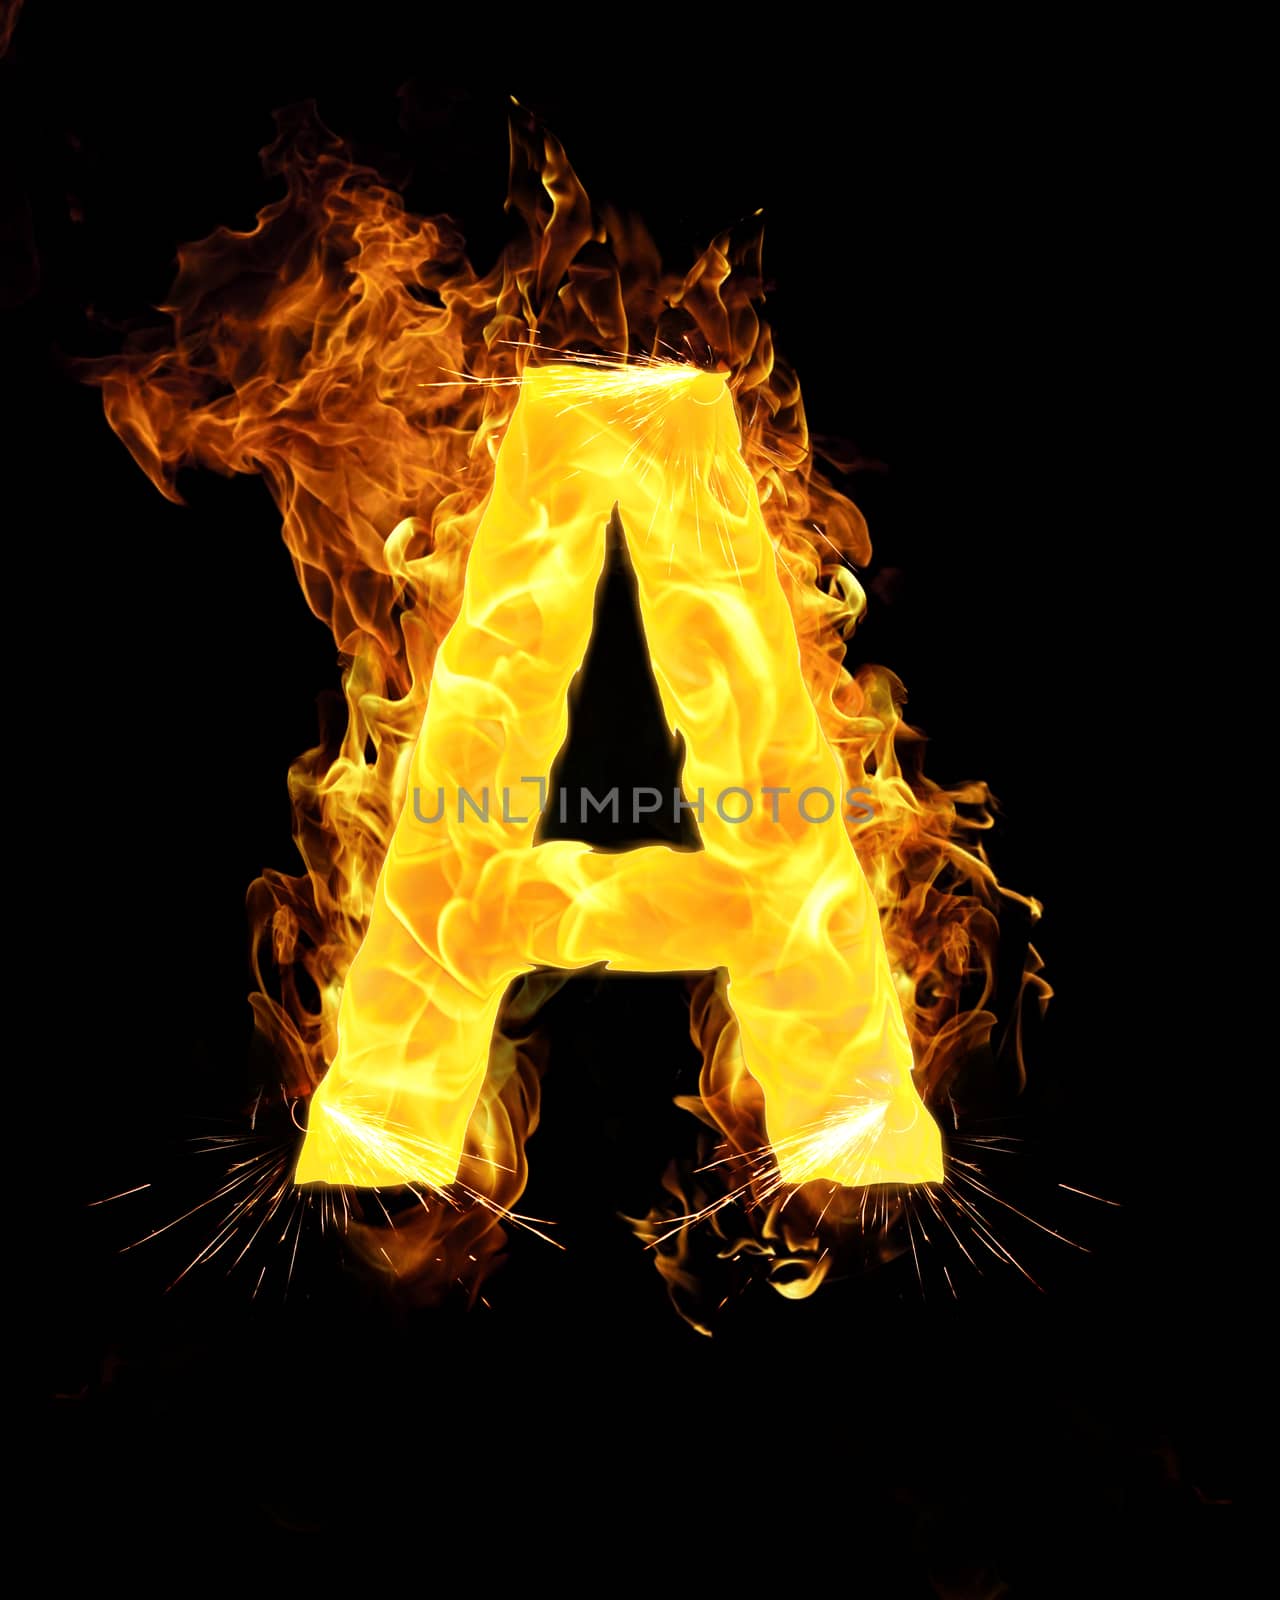 A letter of the alphabet on fire.